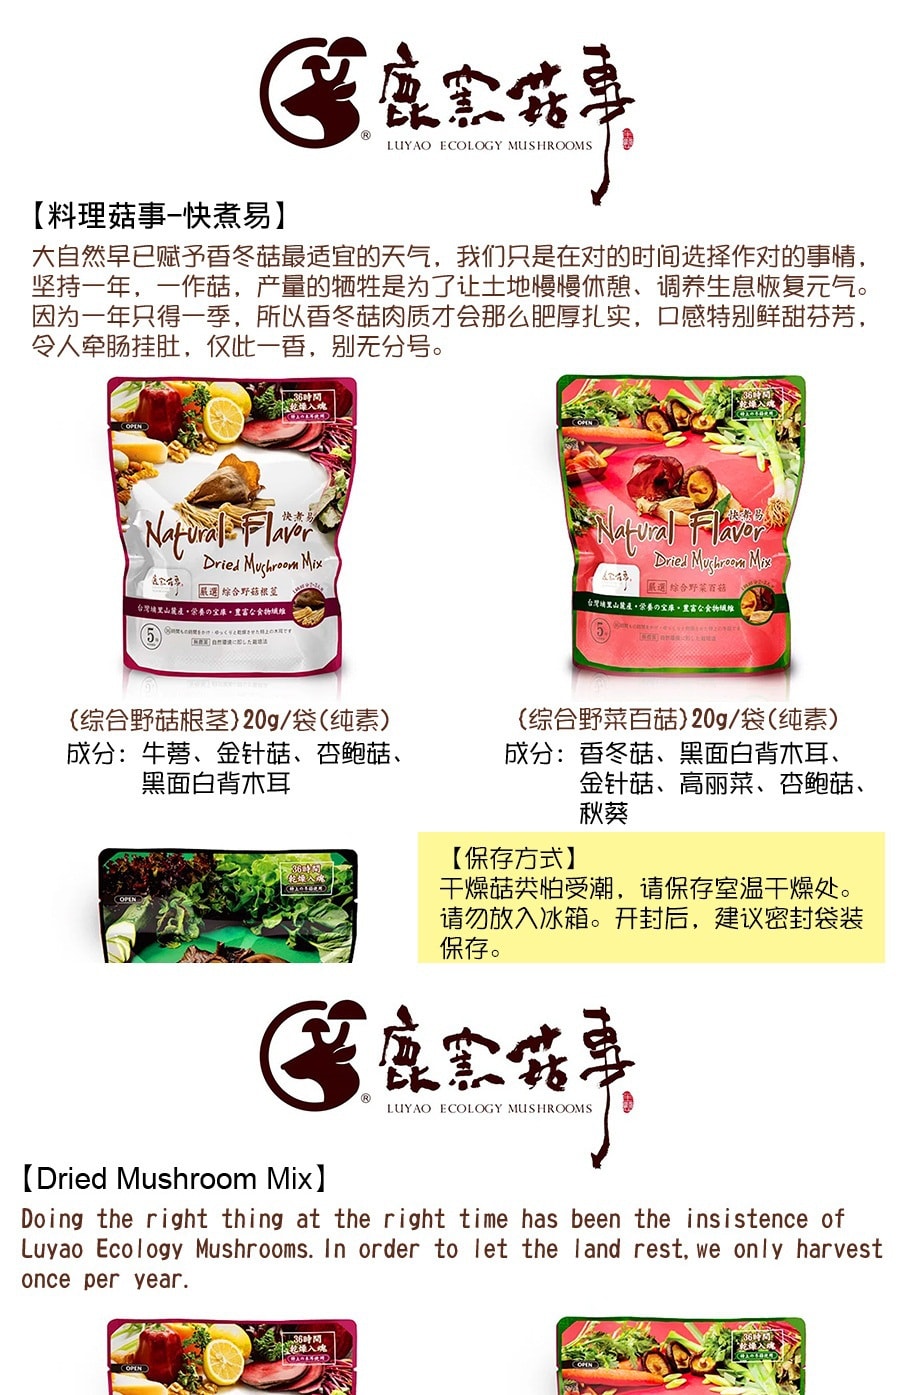 [Taiwan Direct Mail] LUYAO Dried Mushroom Mix 3pack Combo*Vegan/Specialty/Instant food*